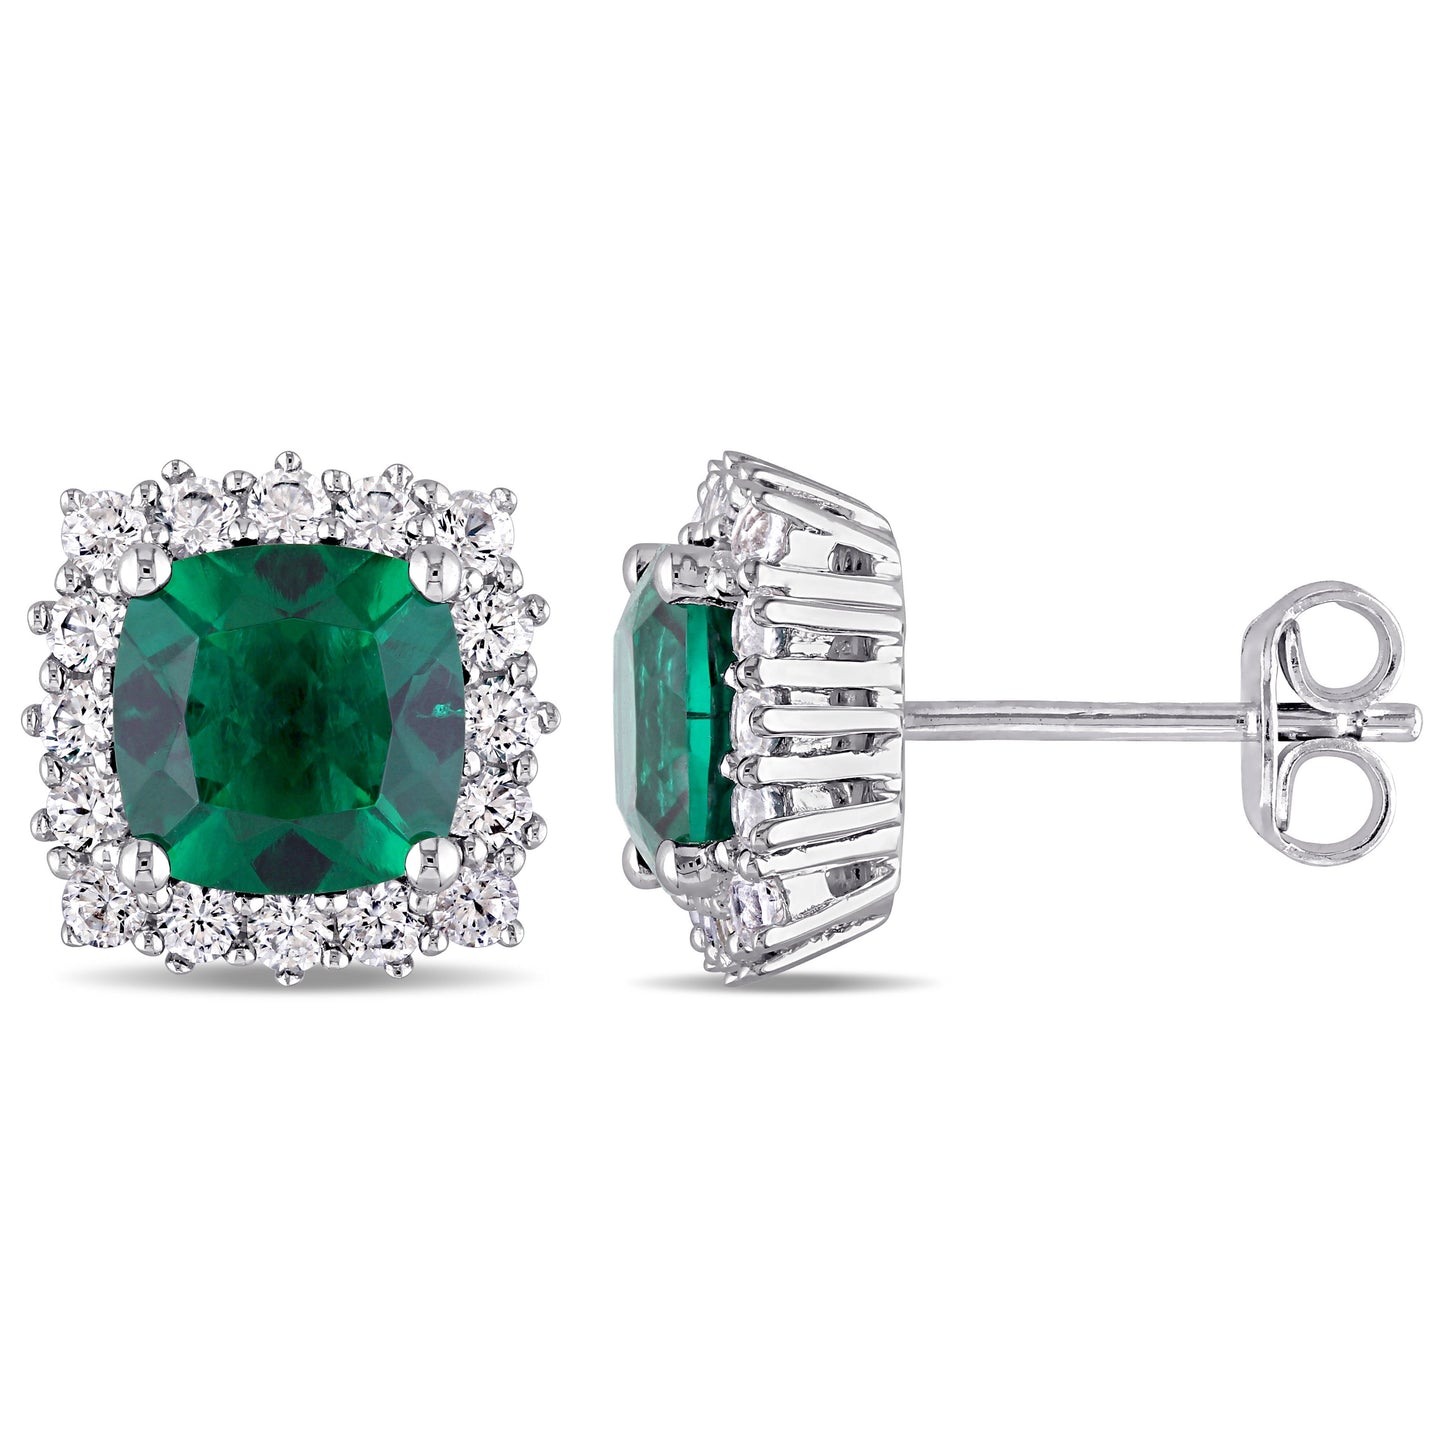 Cushion Cut Created Emerald & White Sapphire Earrings in Sterling Silver